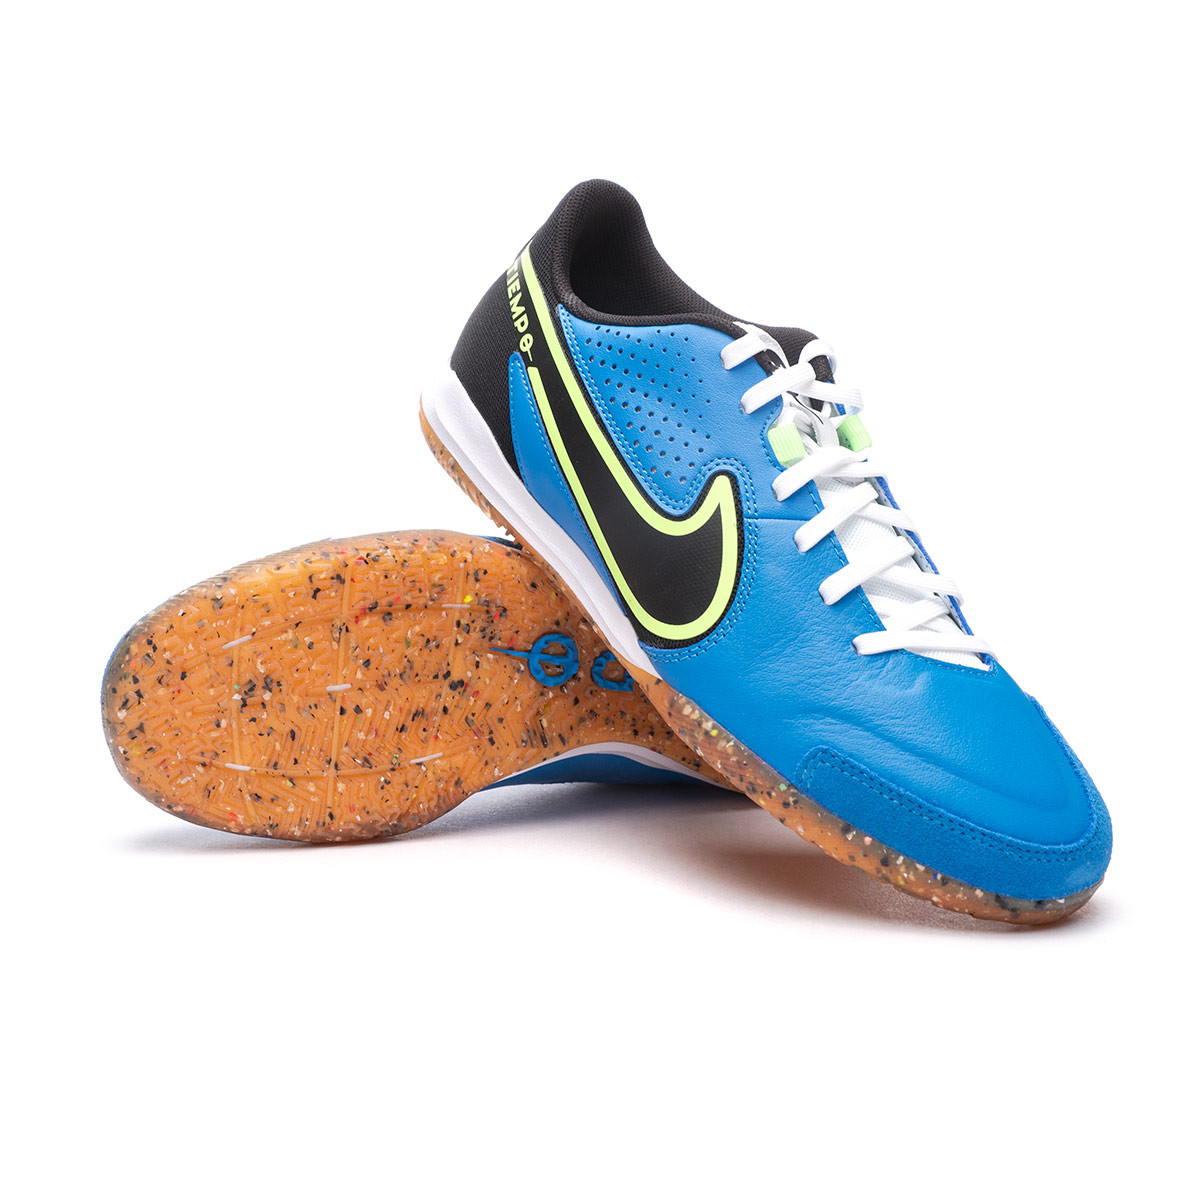 Indoor boots Nike Legend 9 Academy IC Blue-Black-Lime Glow-Brown - Fútbol Emotion